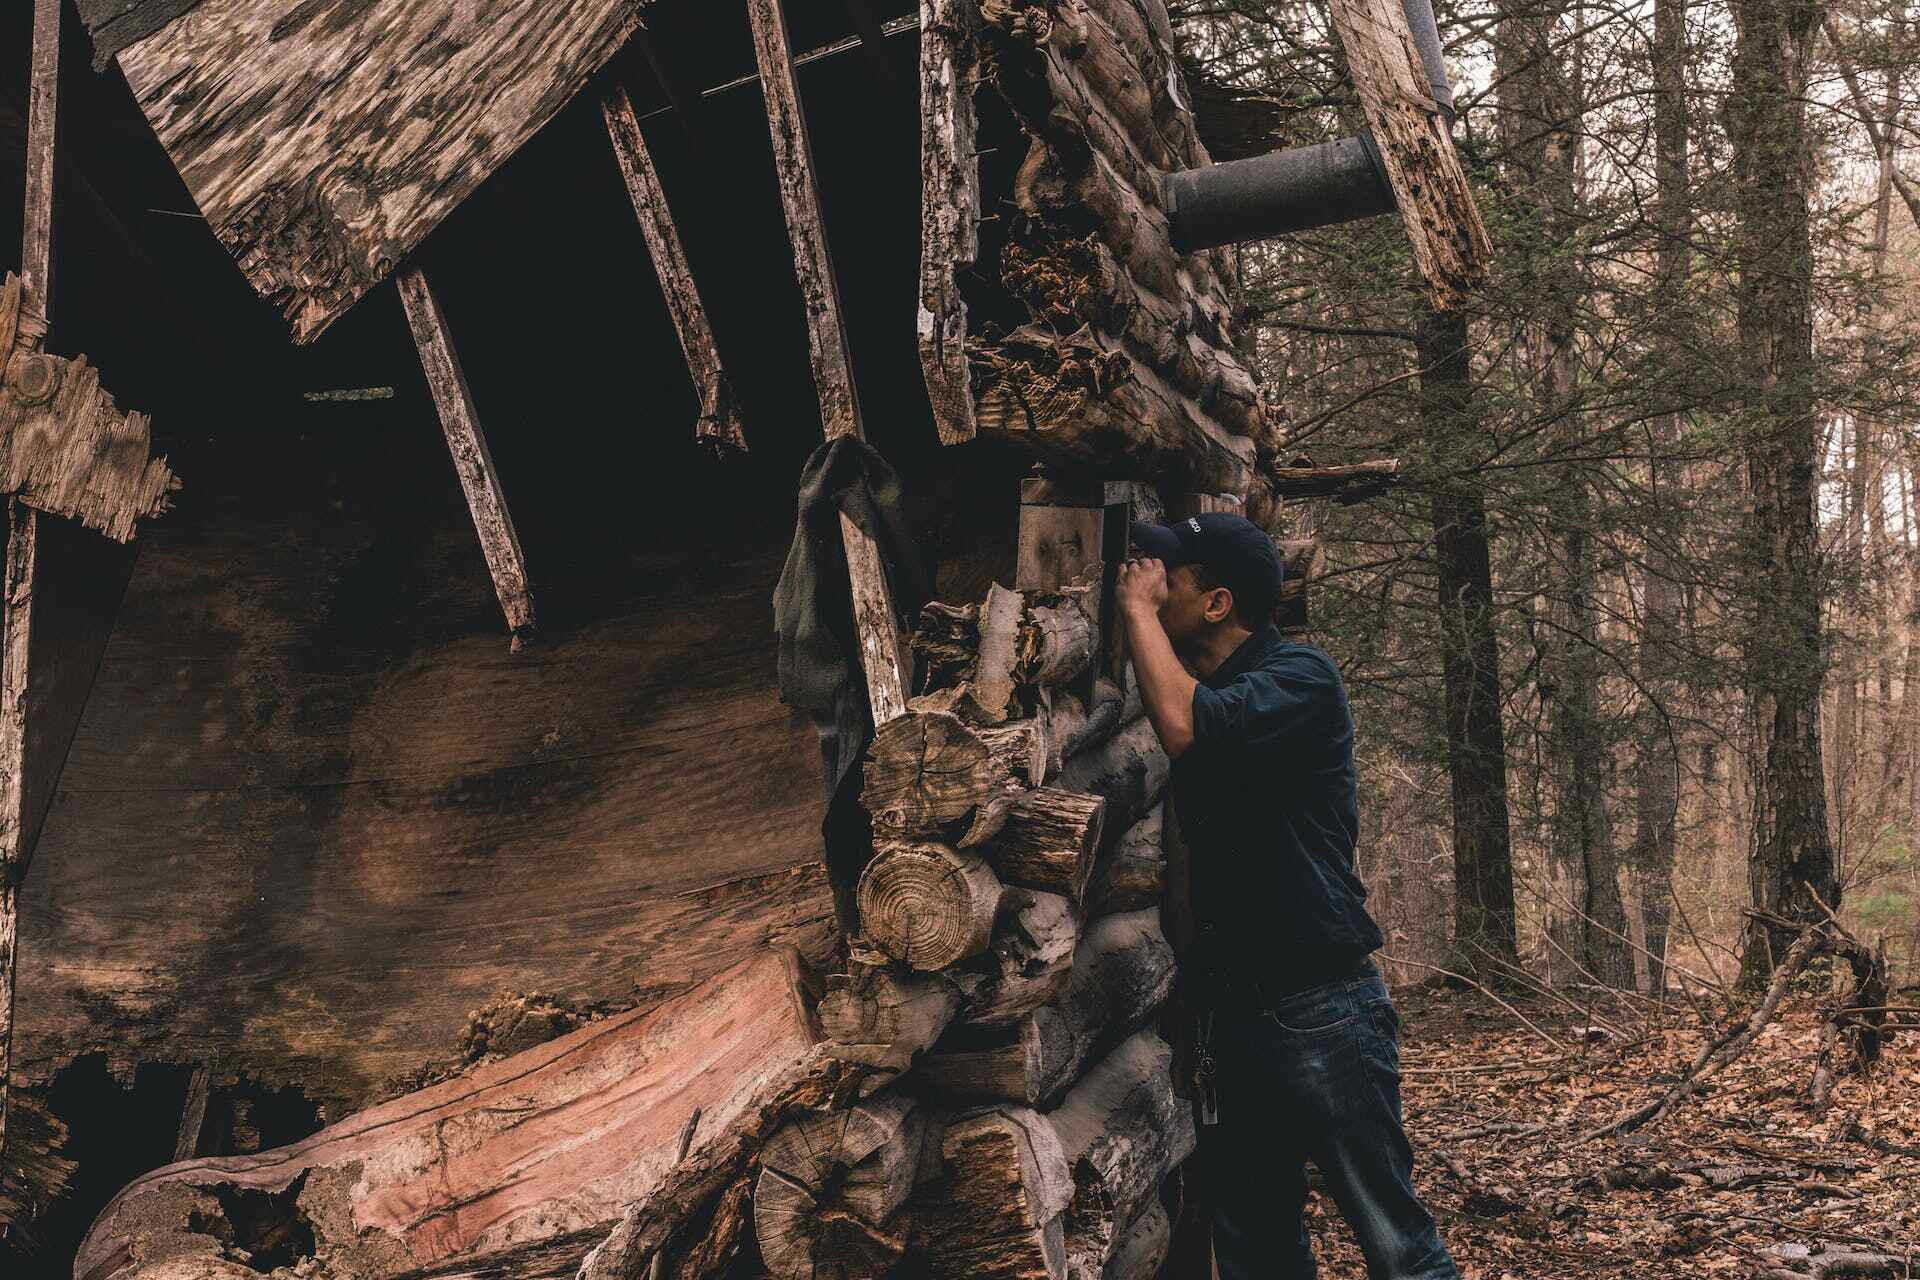 A man searching for a lost cat outdoors near a log cabin